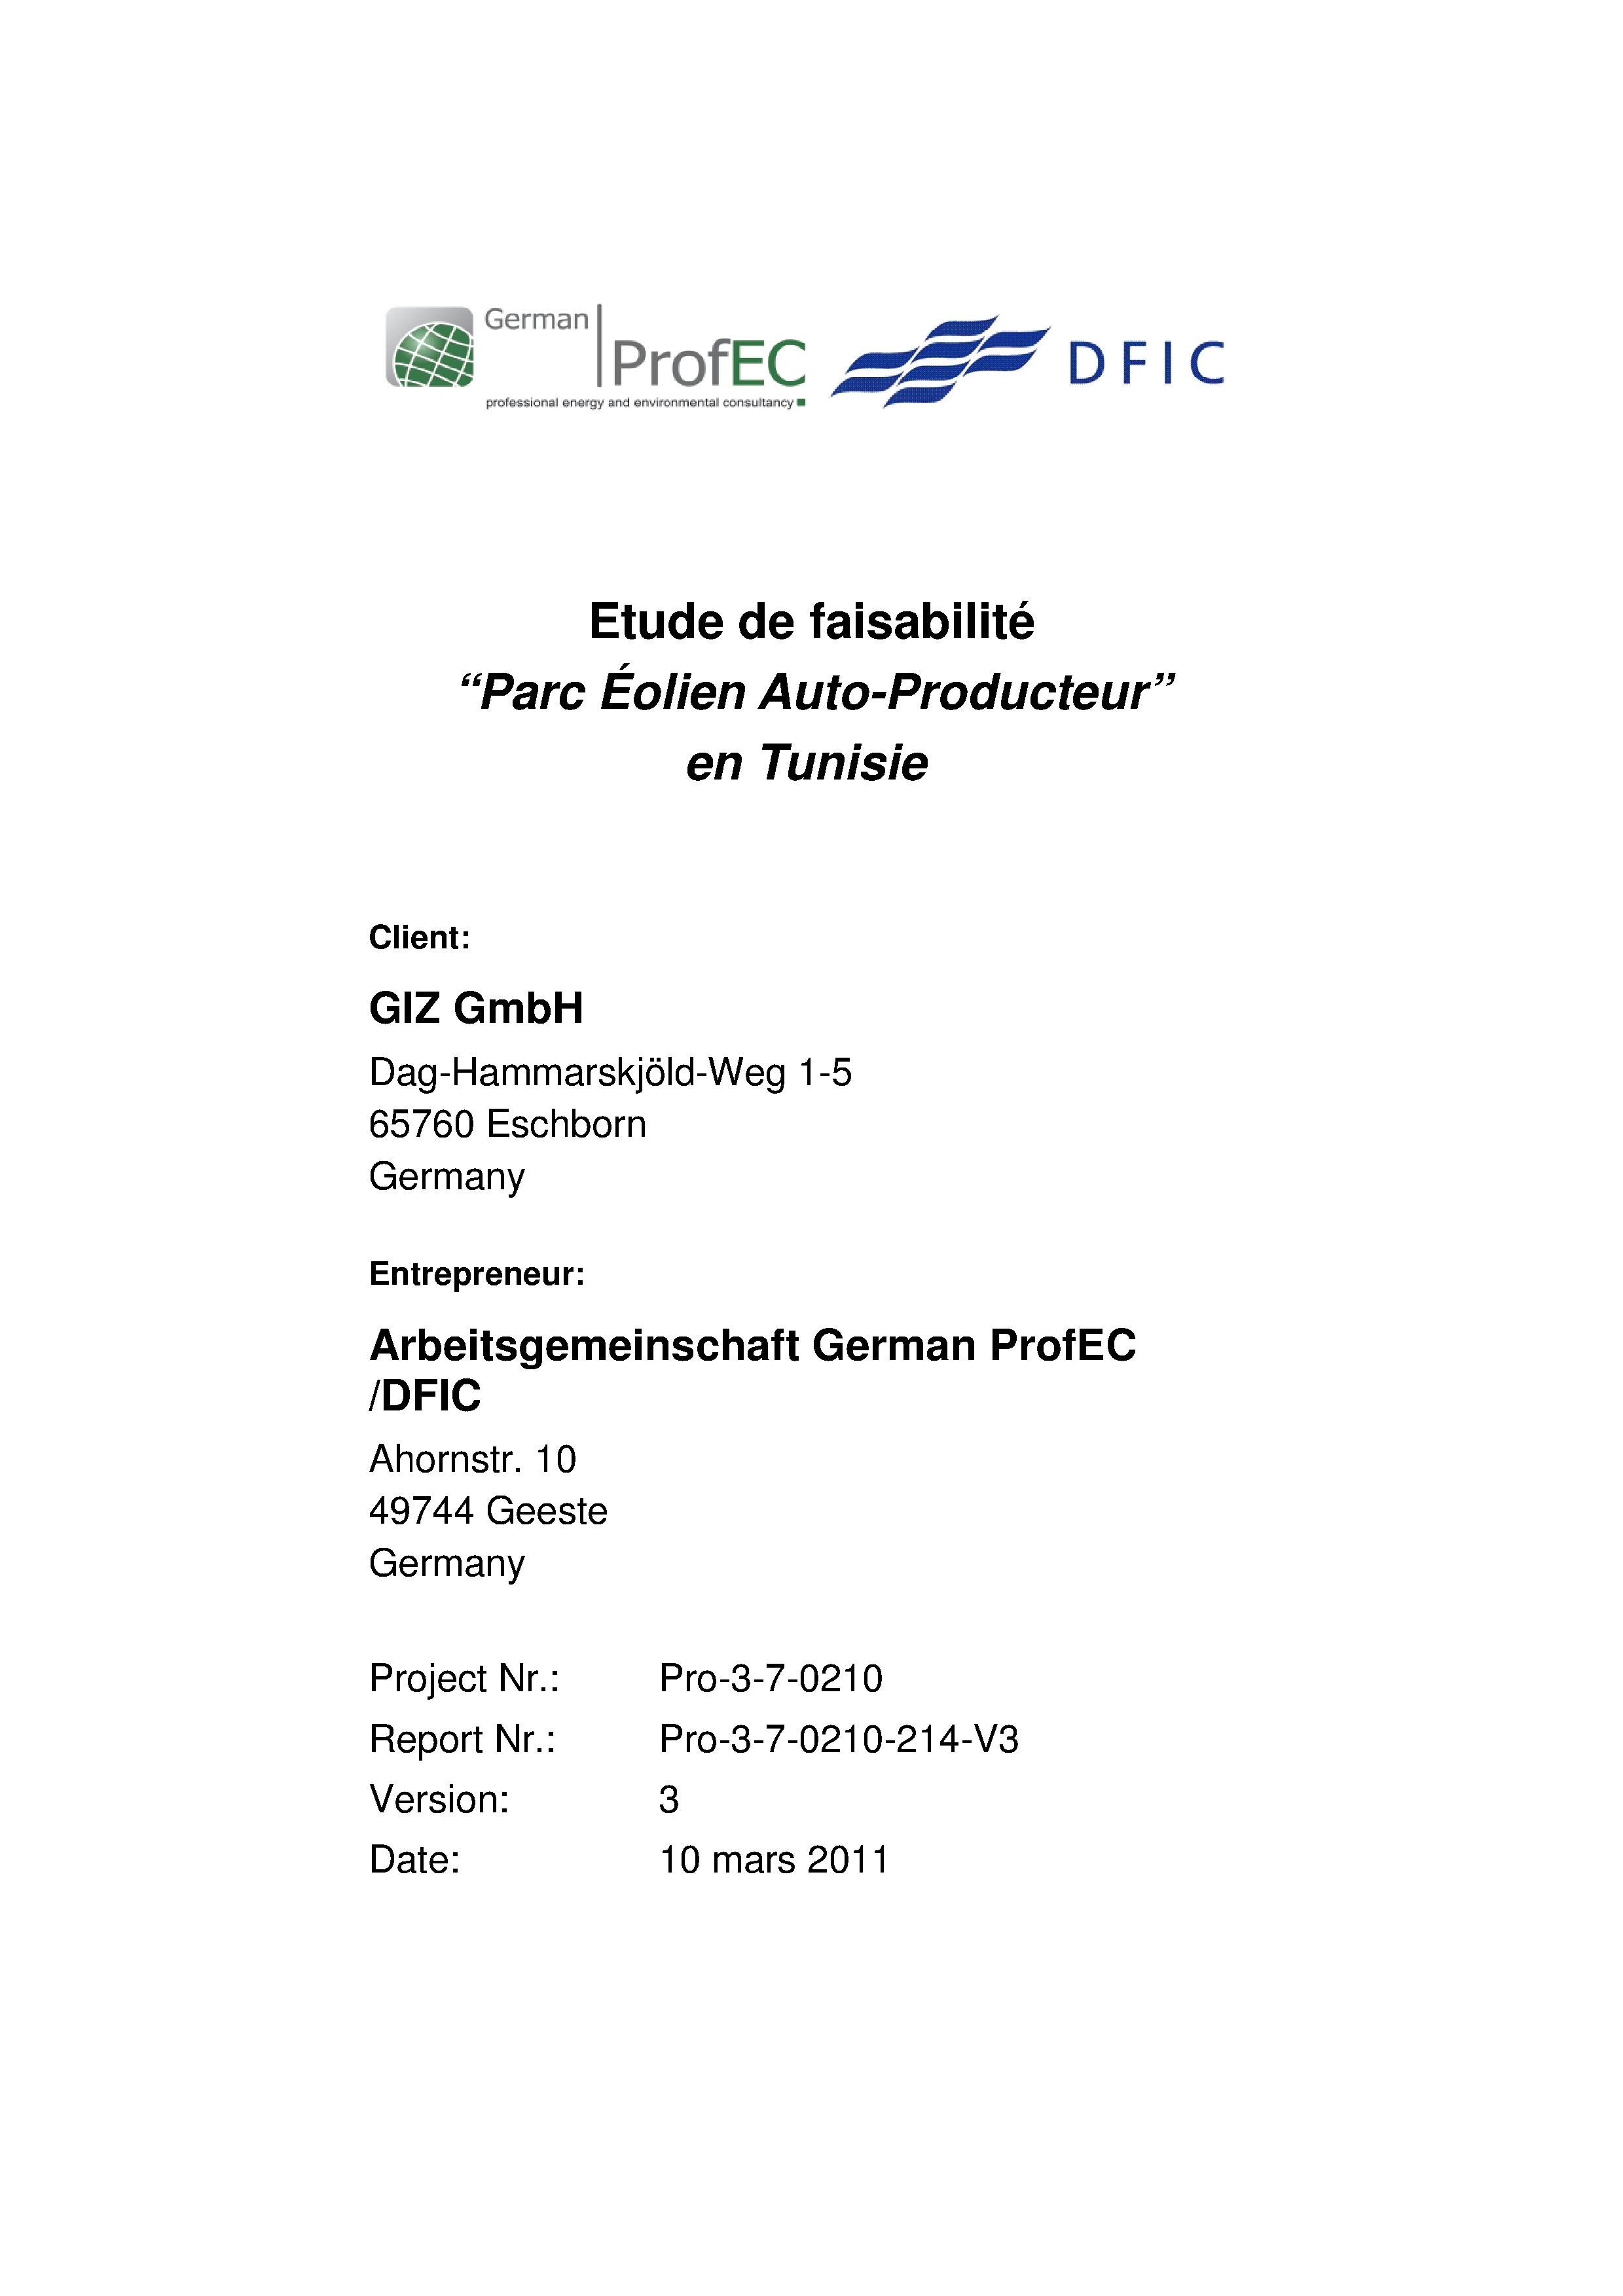 Feasibility study for a wind parc within the autoproduction framework, German ProfEC/DFIC/GIZ, 2011